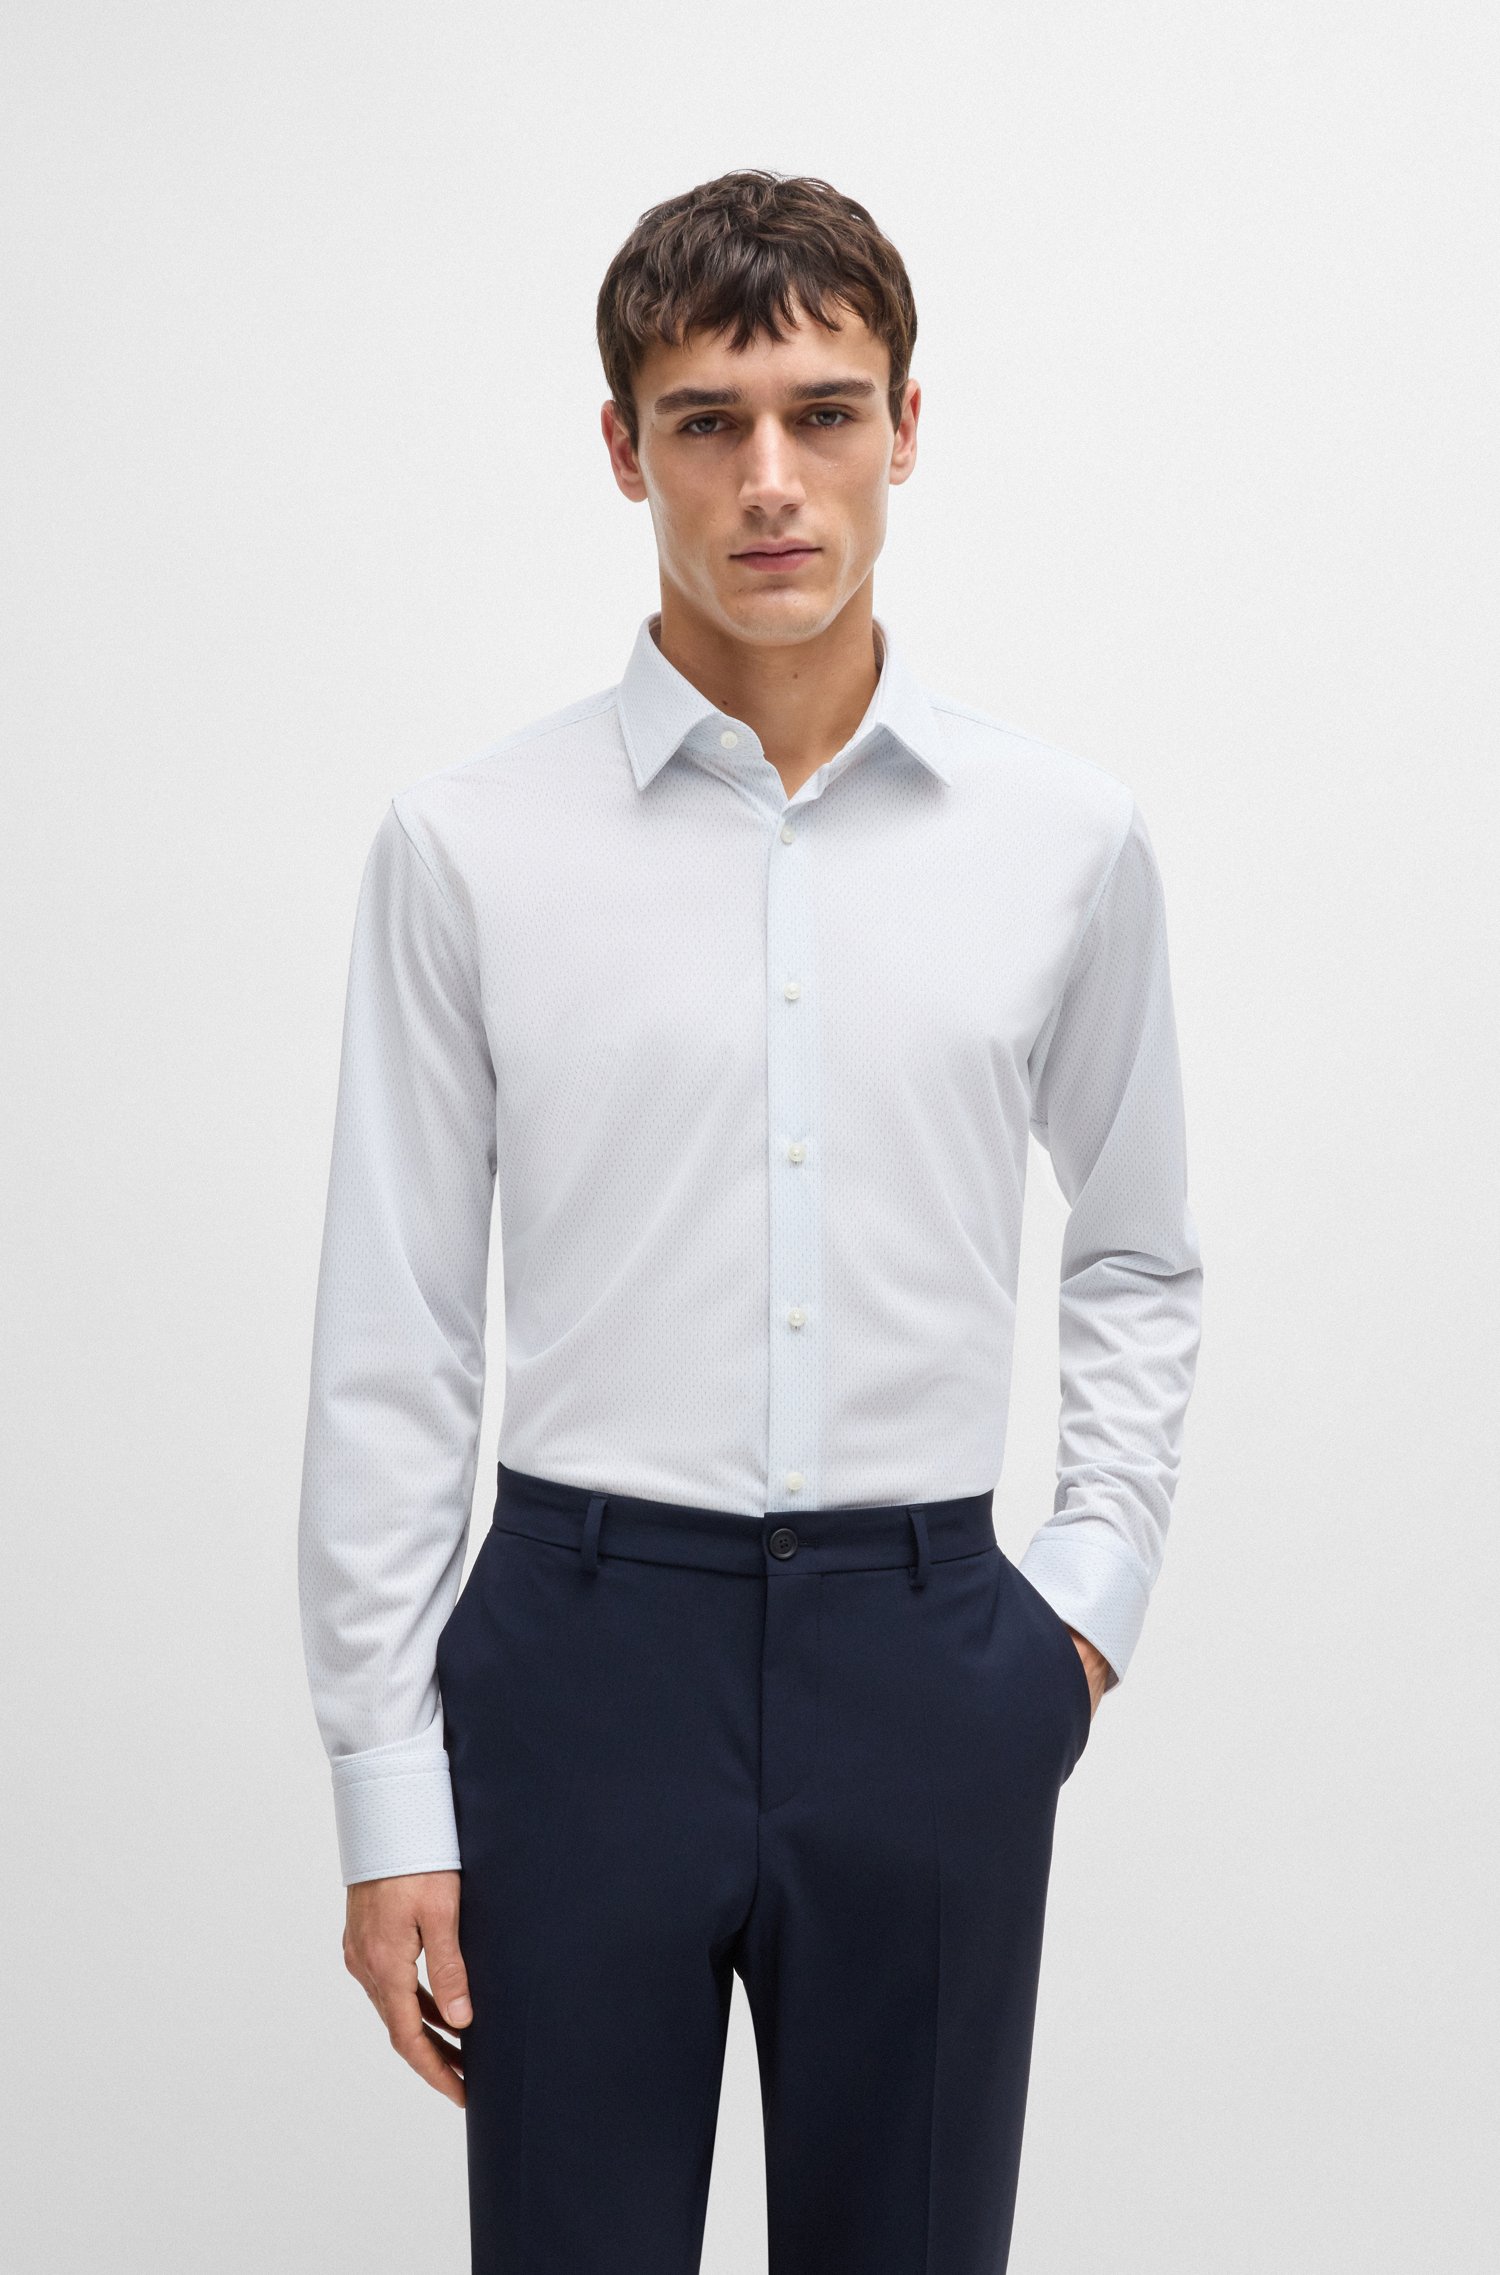 Regular-fit shirt structured performance material